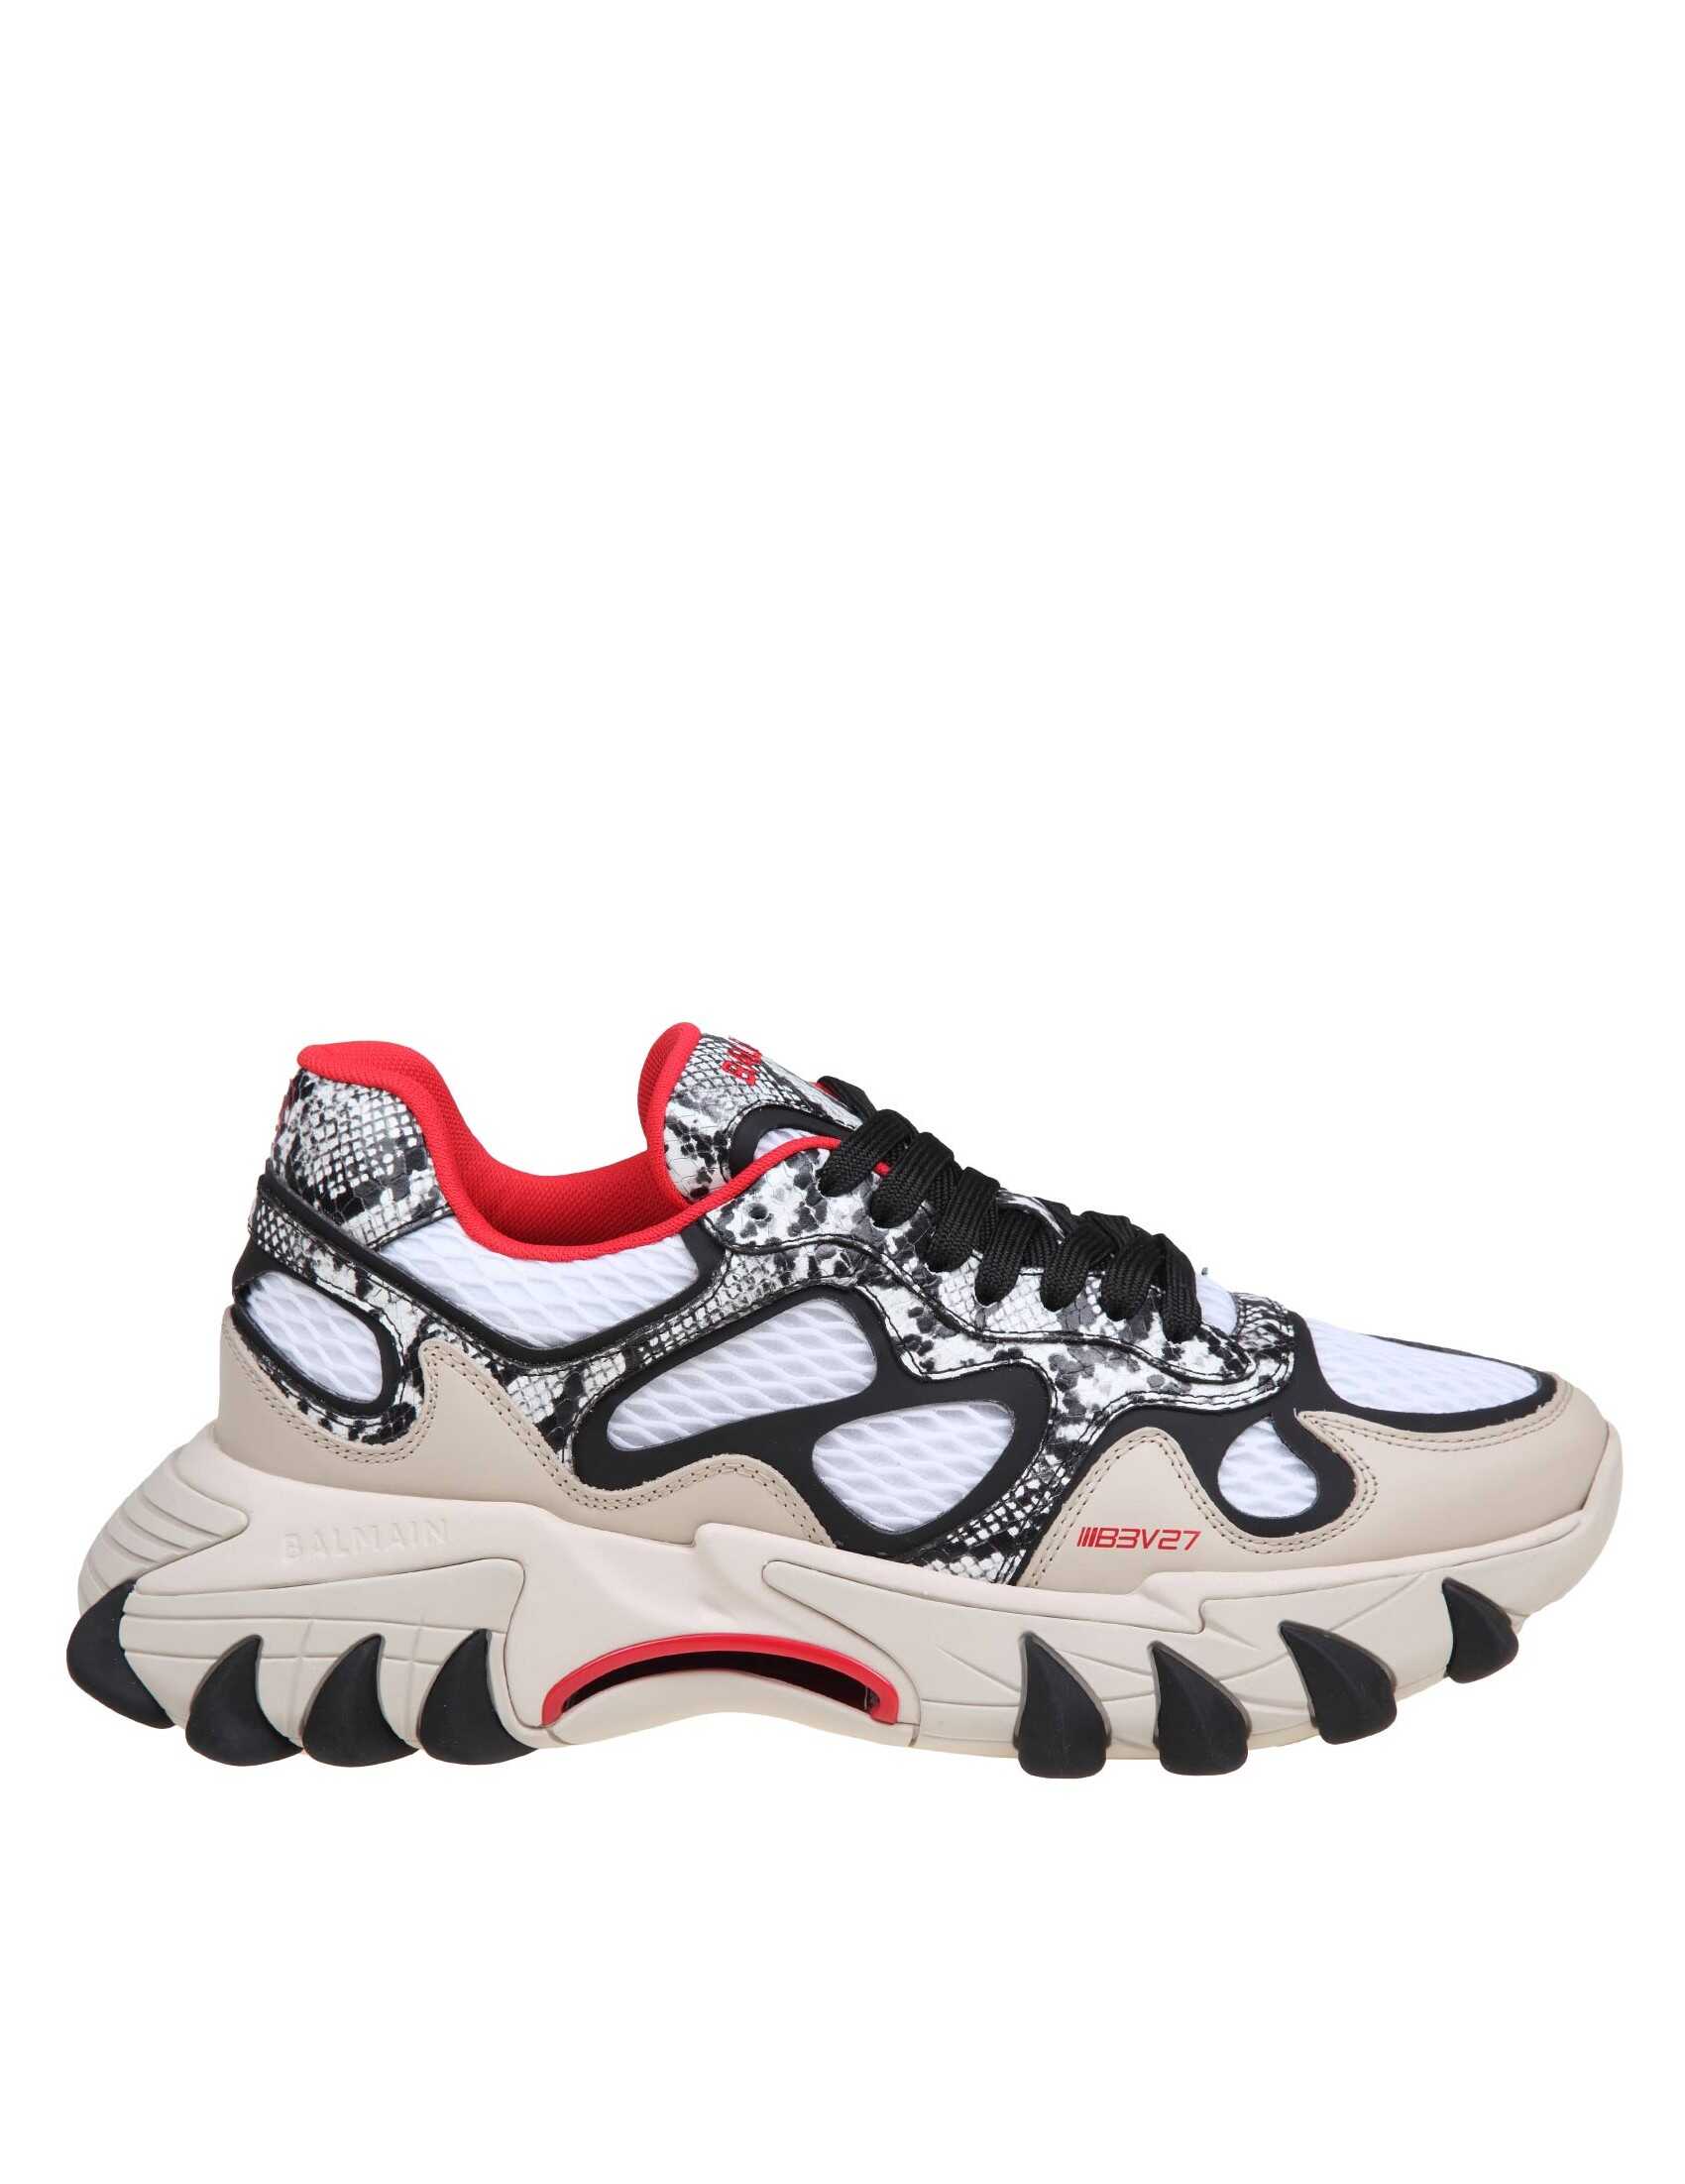 Balmain Balmain b-east sneakers in mix of materials with python effect Grey